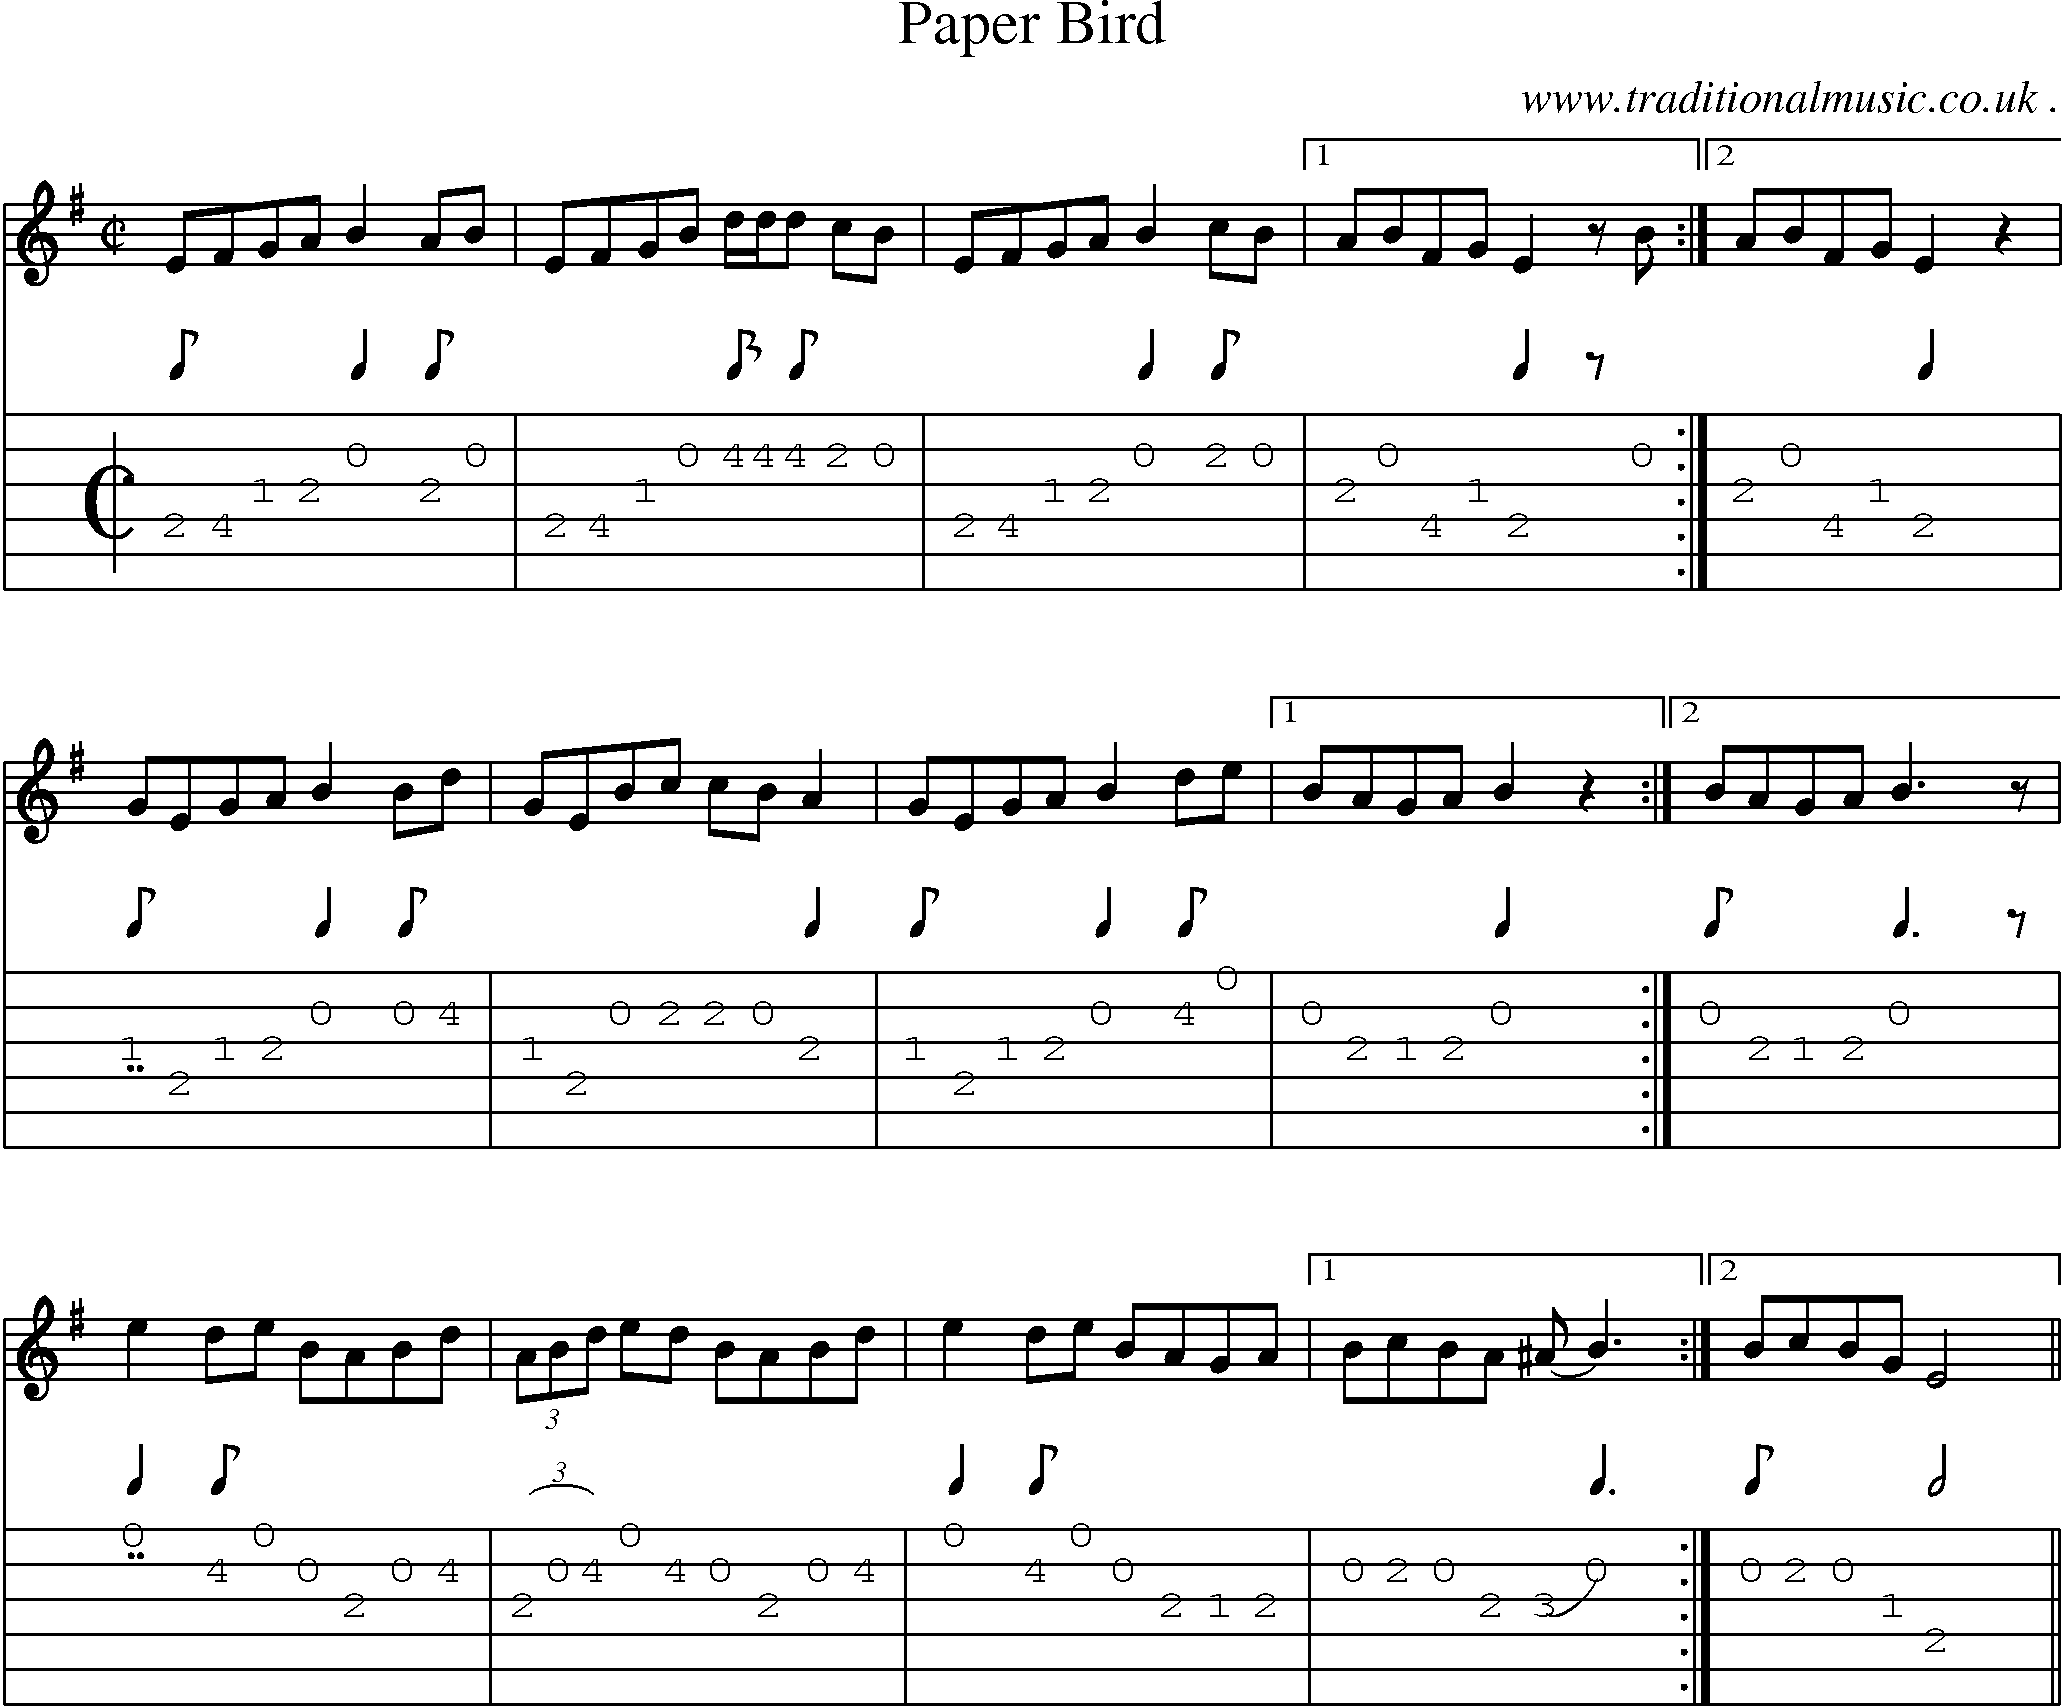 Sheet-Music and Guitar Tabs for Paper Bird